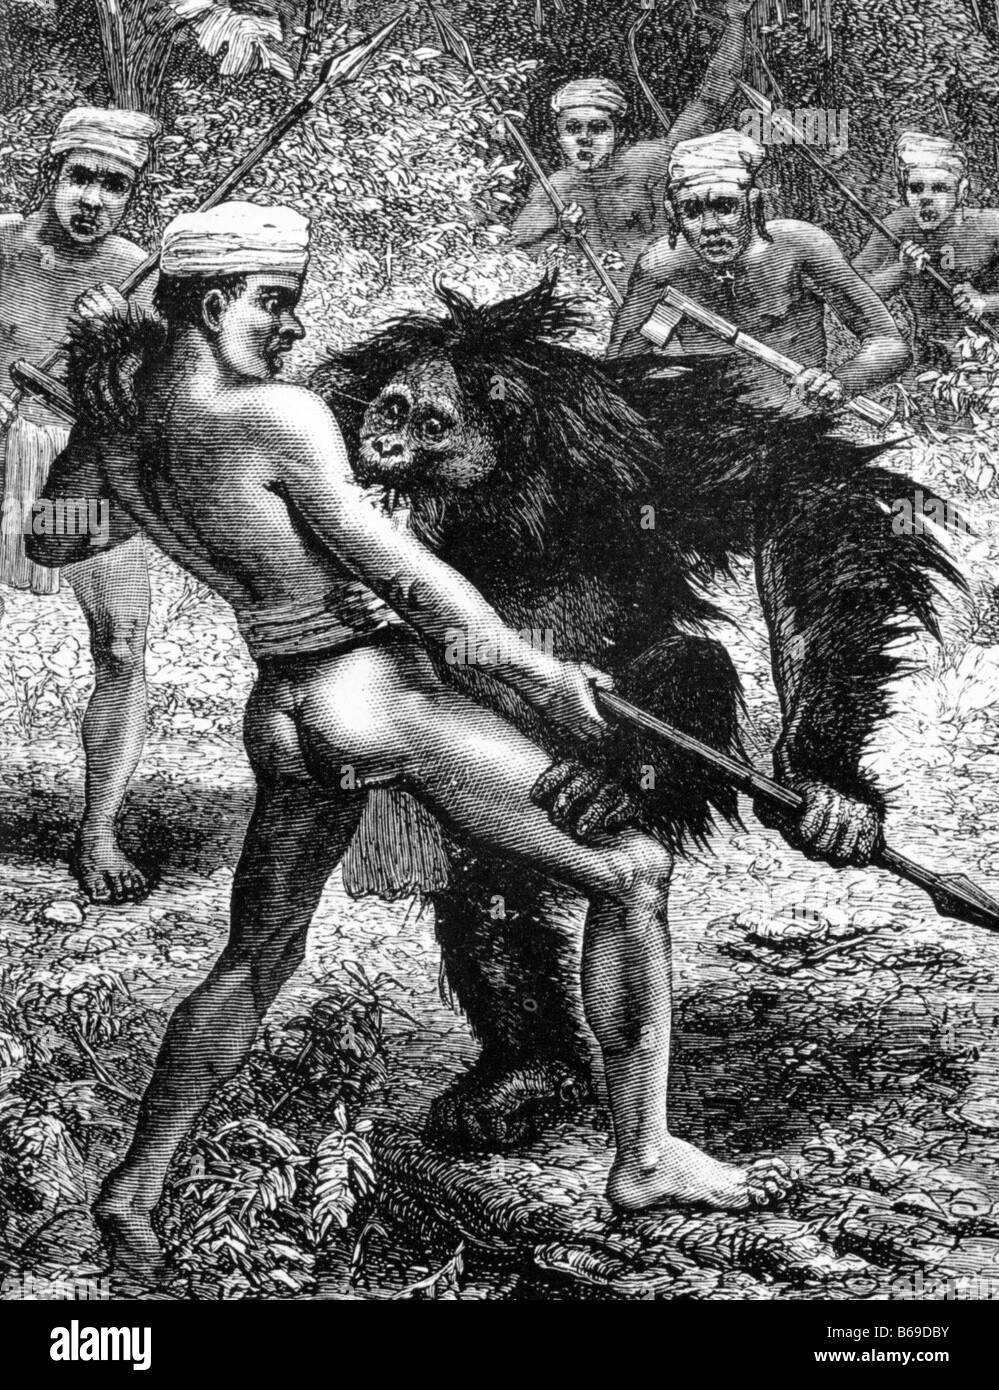 THE MALAY ARCHIPELIGO Illustration from Alfred Russell Wallace's 1869 book showing native Dyaks hunting Orang Utangs Stock Photo